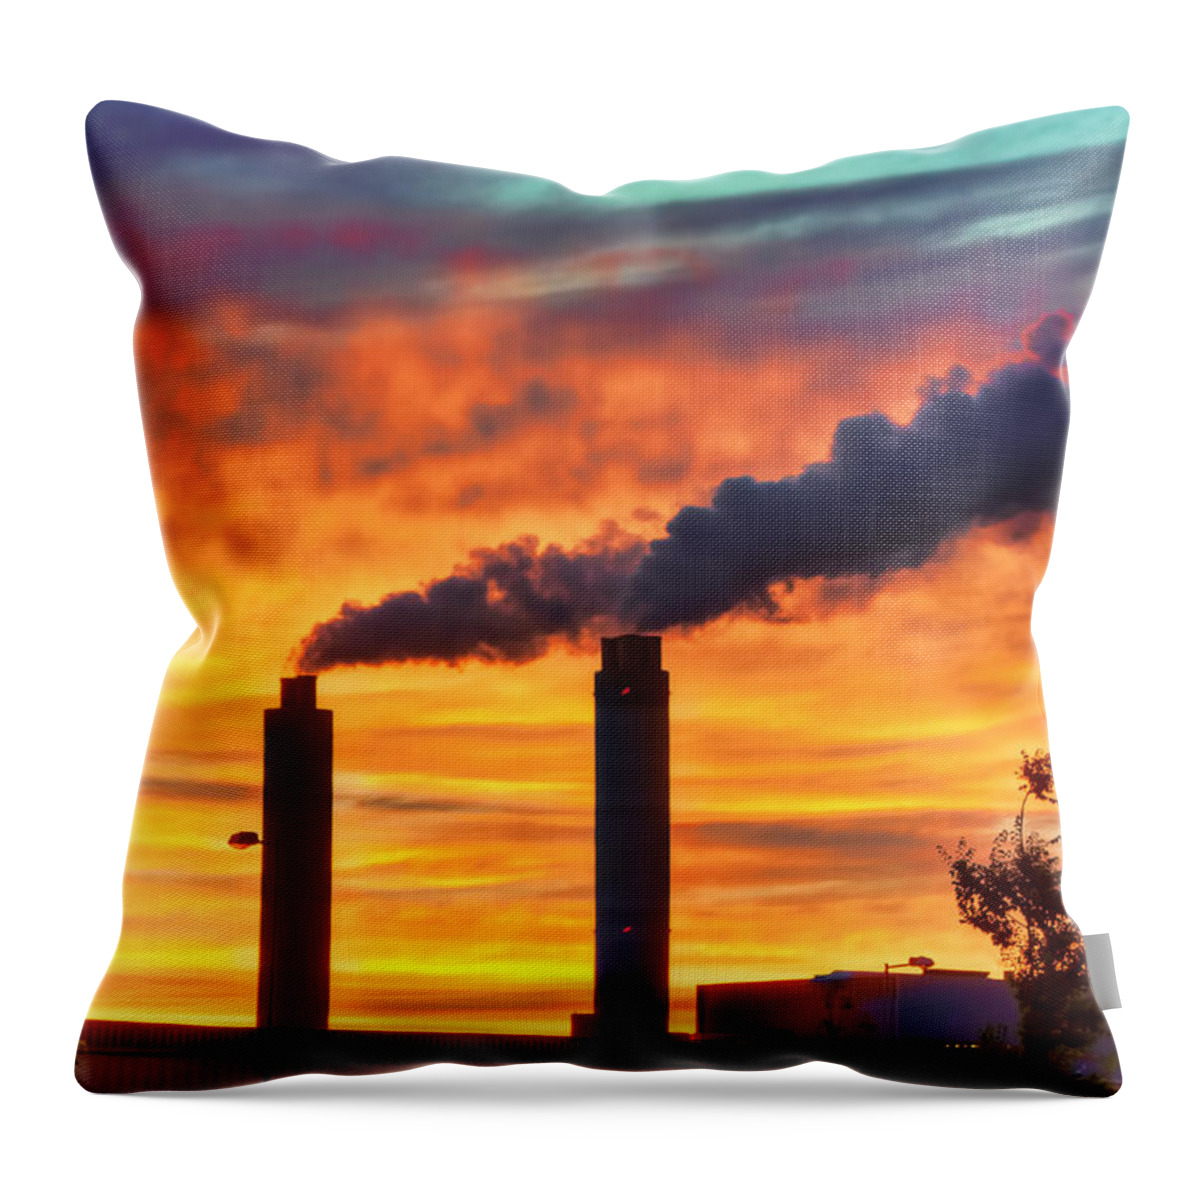 Netherland Throw Pillow featuring the photograph Sunset Industry by Nadia Sanowar